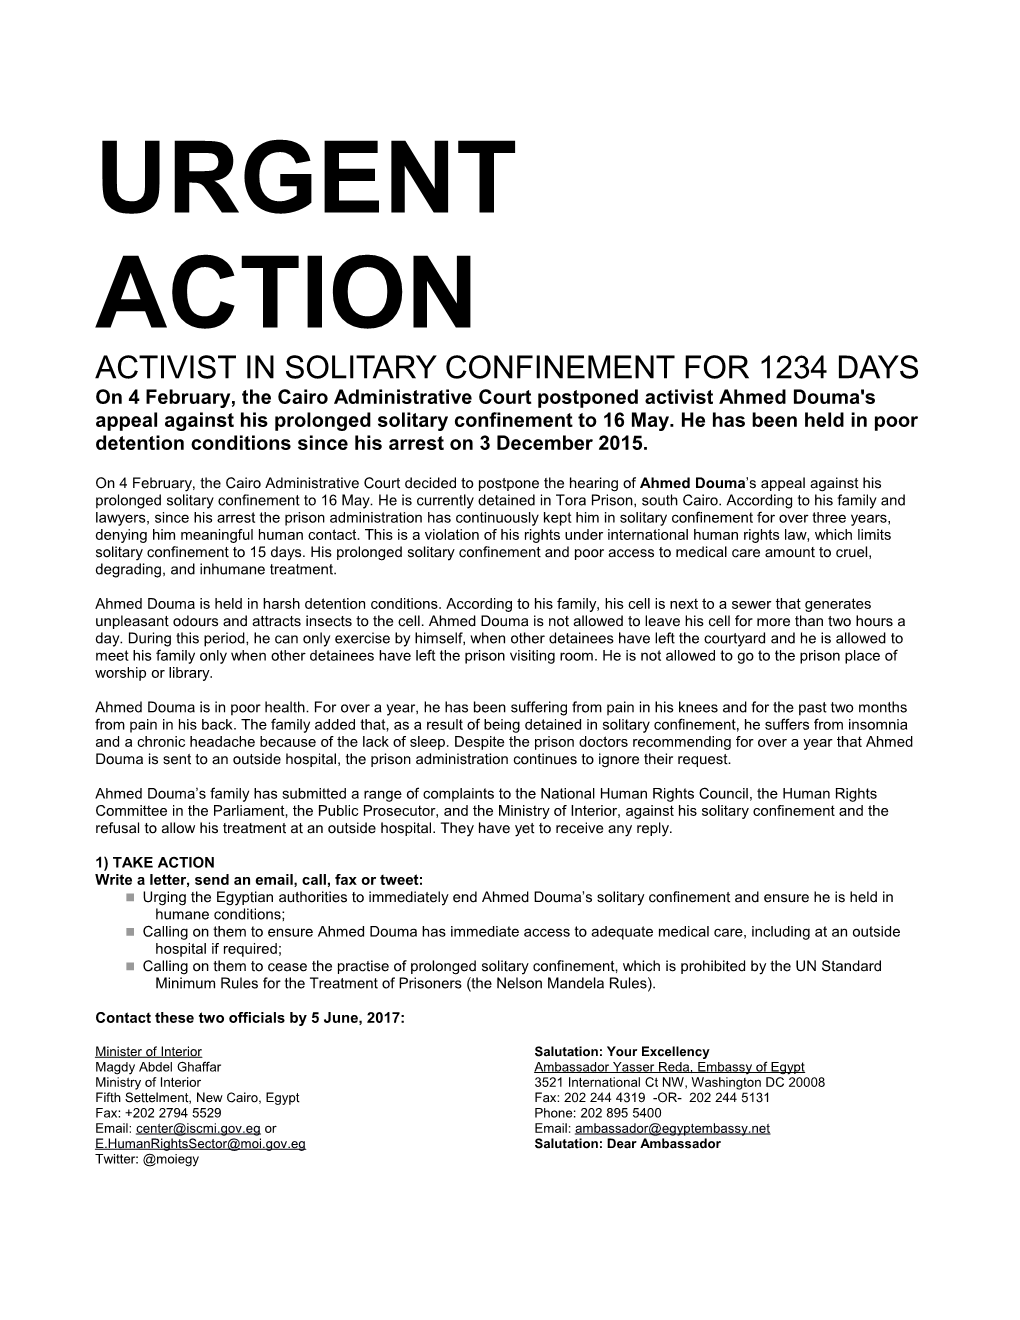 Activist in Solitary Confinement for 1234Days